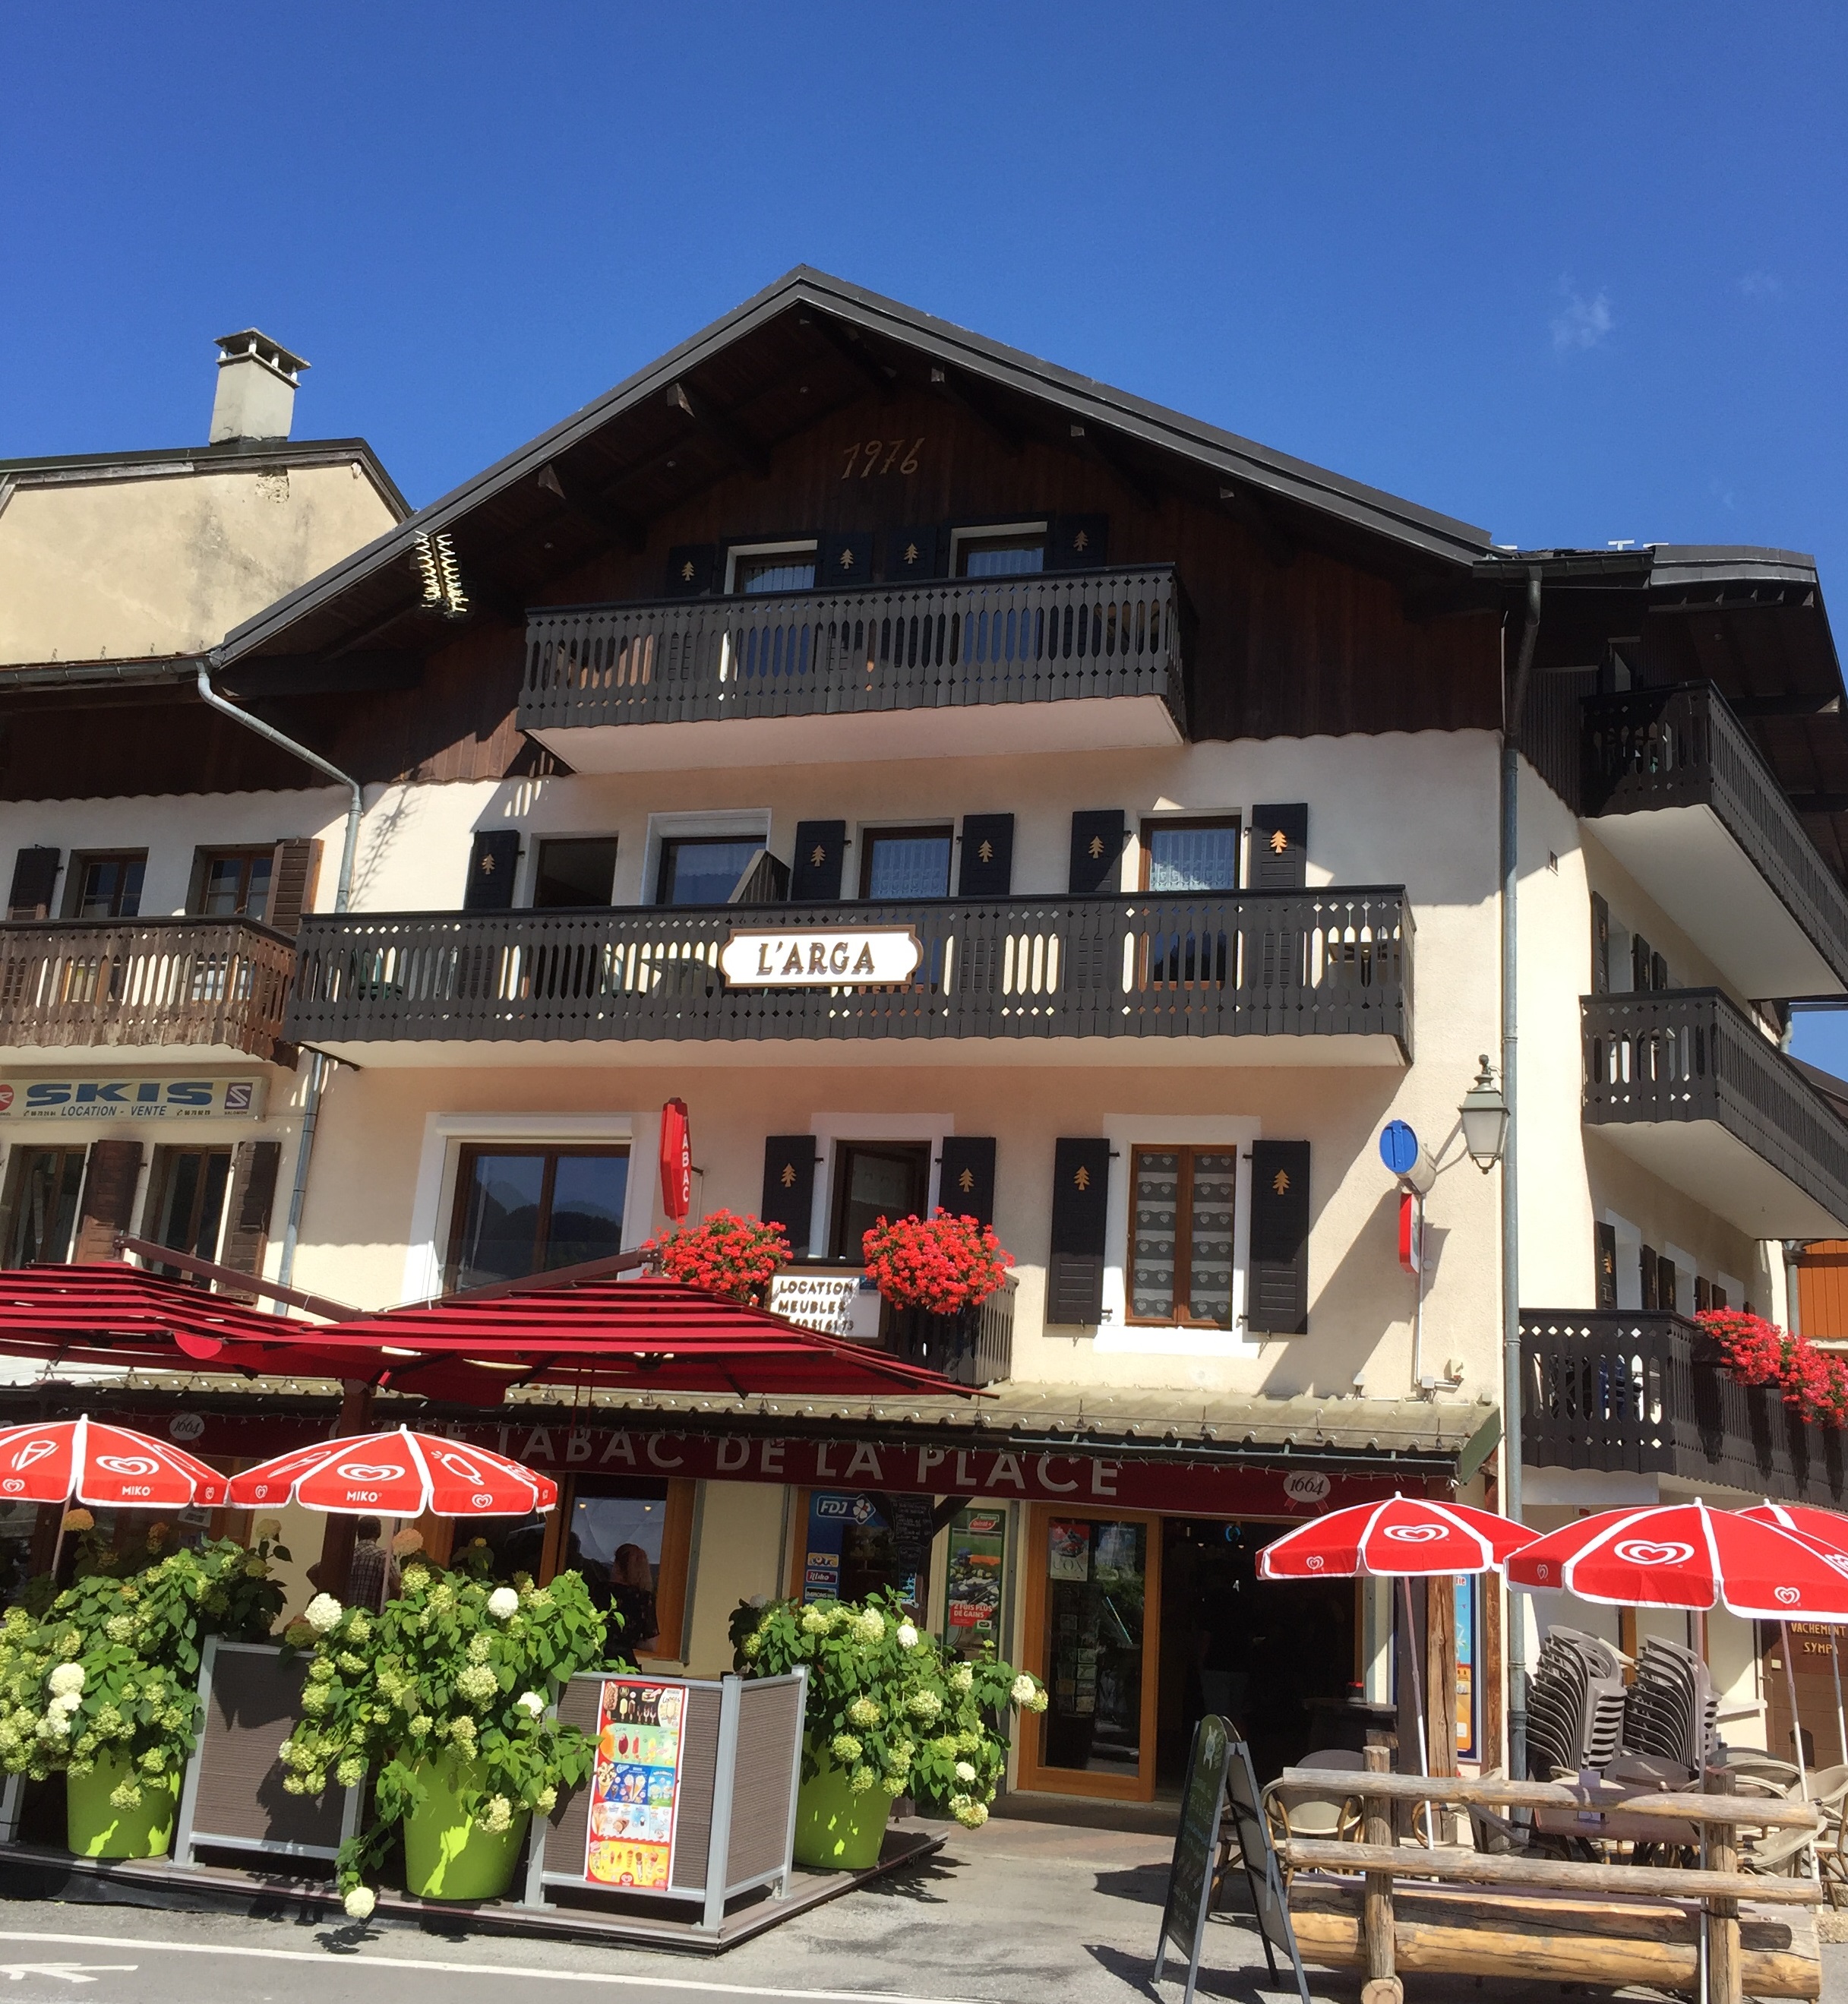 Apartment in chalet - 59m²- 2 bedrooms - Tupin Sophie & Christian